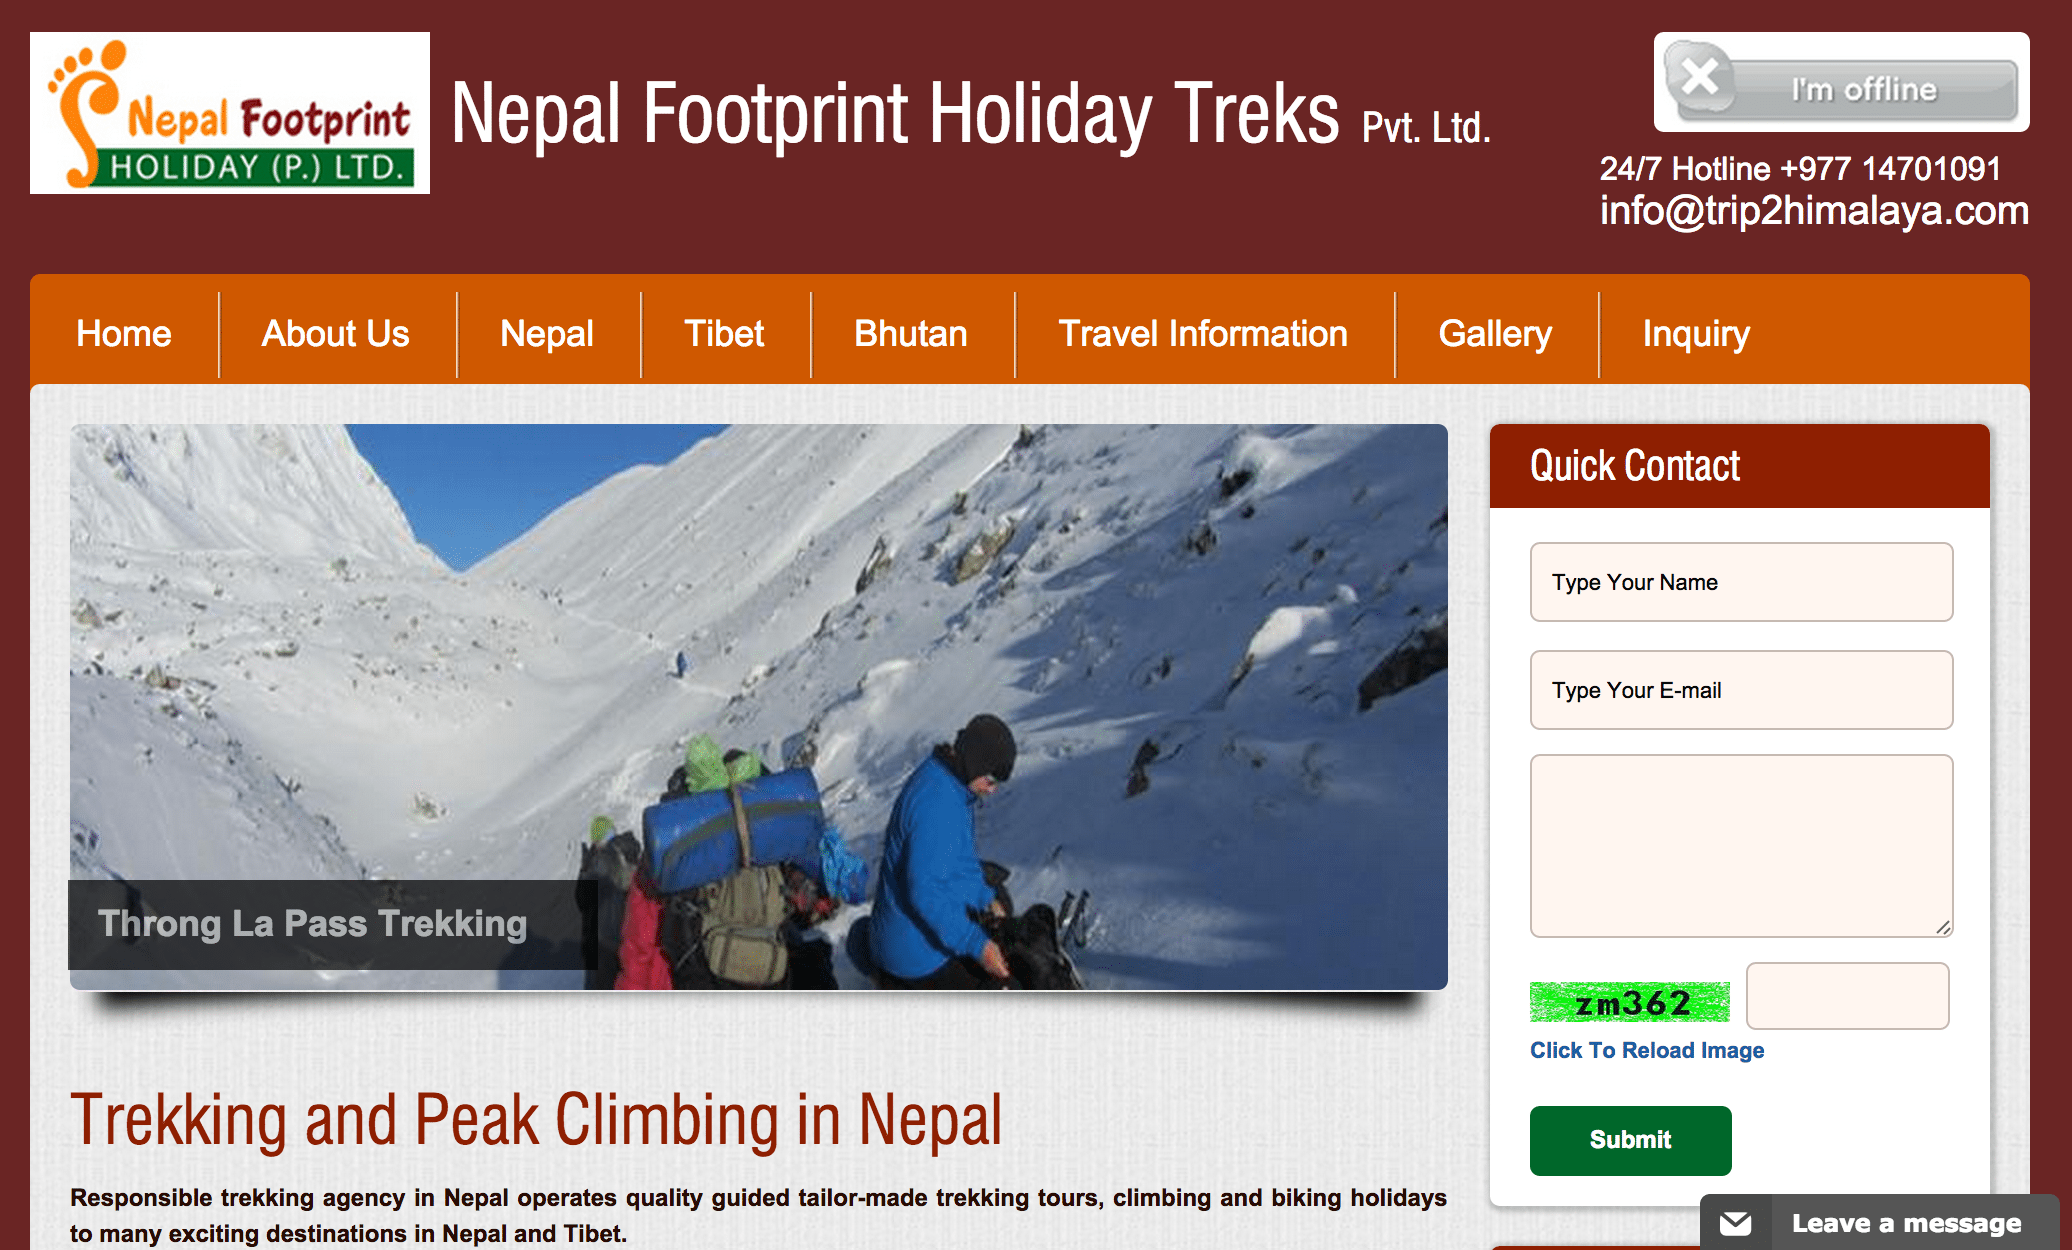 Nepal Footprint Holiday helps you plan travel in Nepal and Tibet.